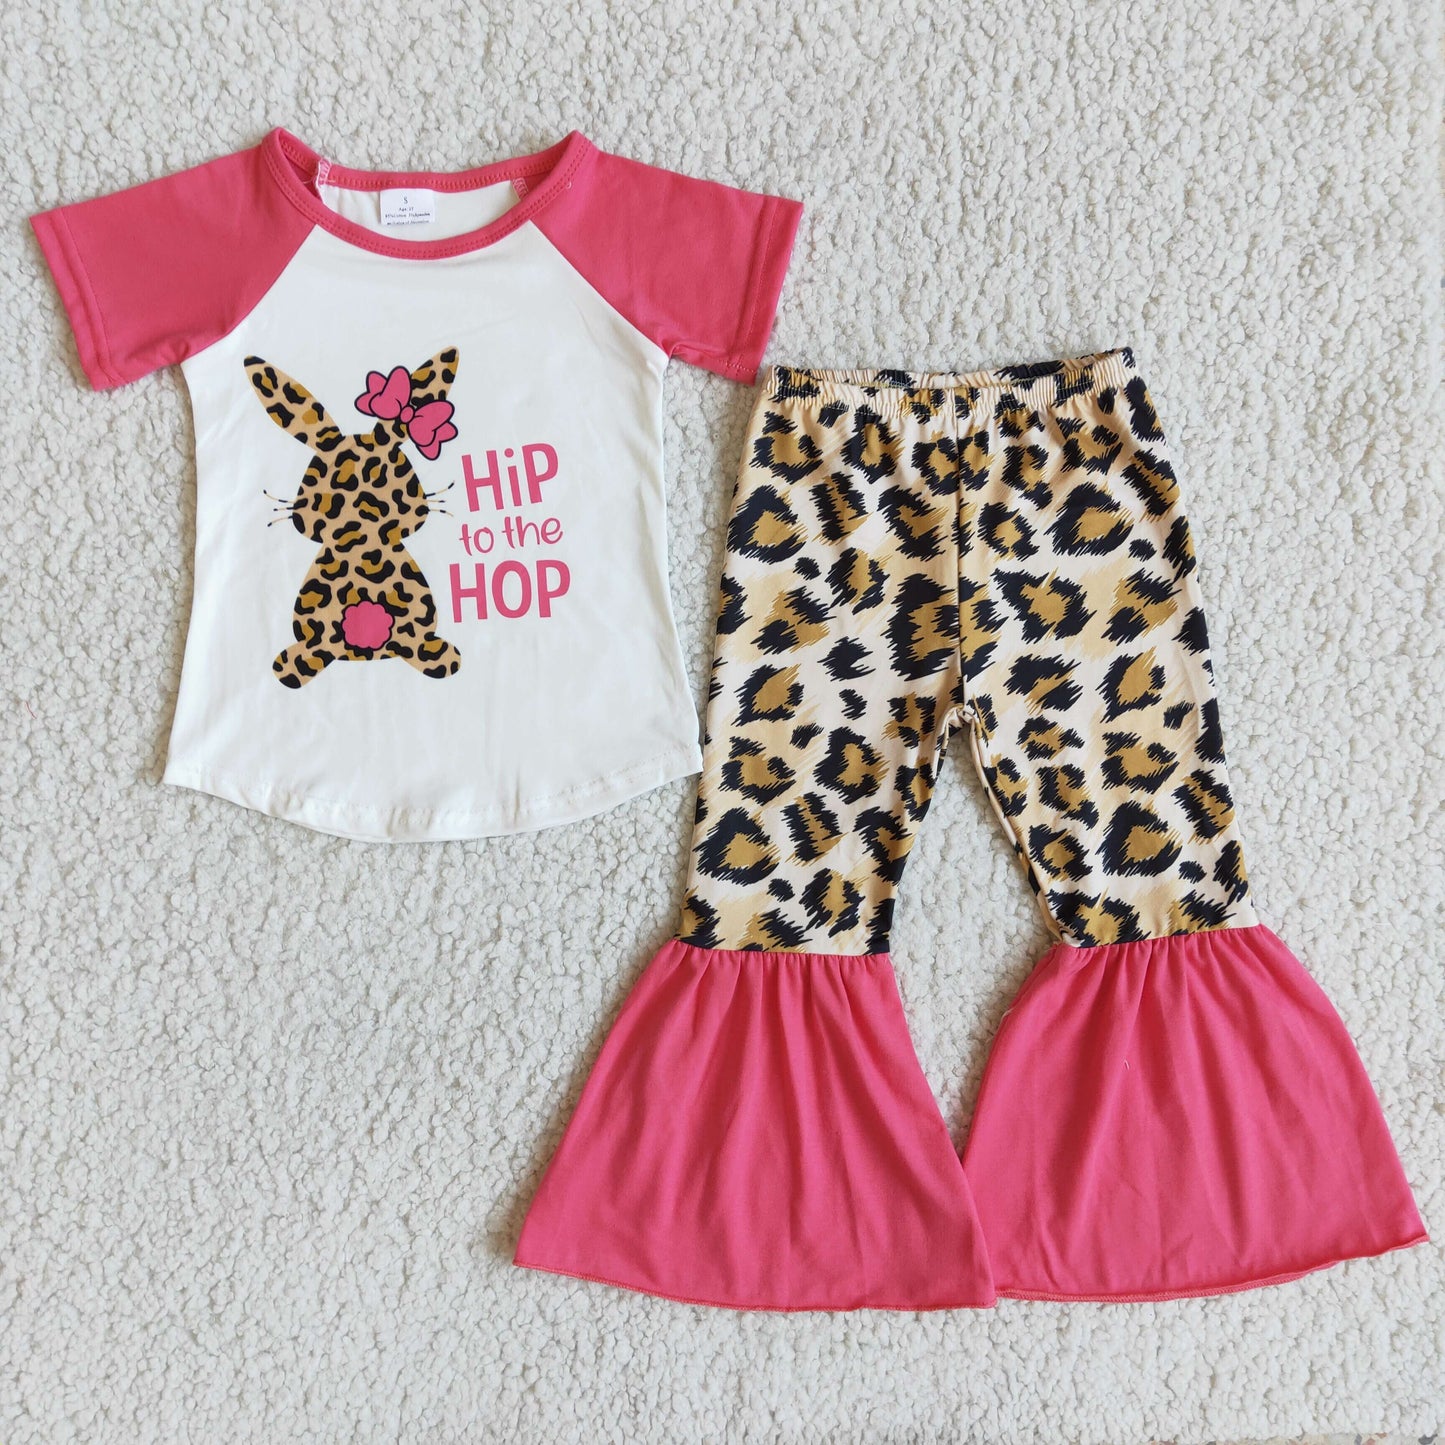 Hip to the hop Easter outfit